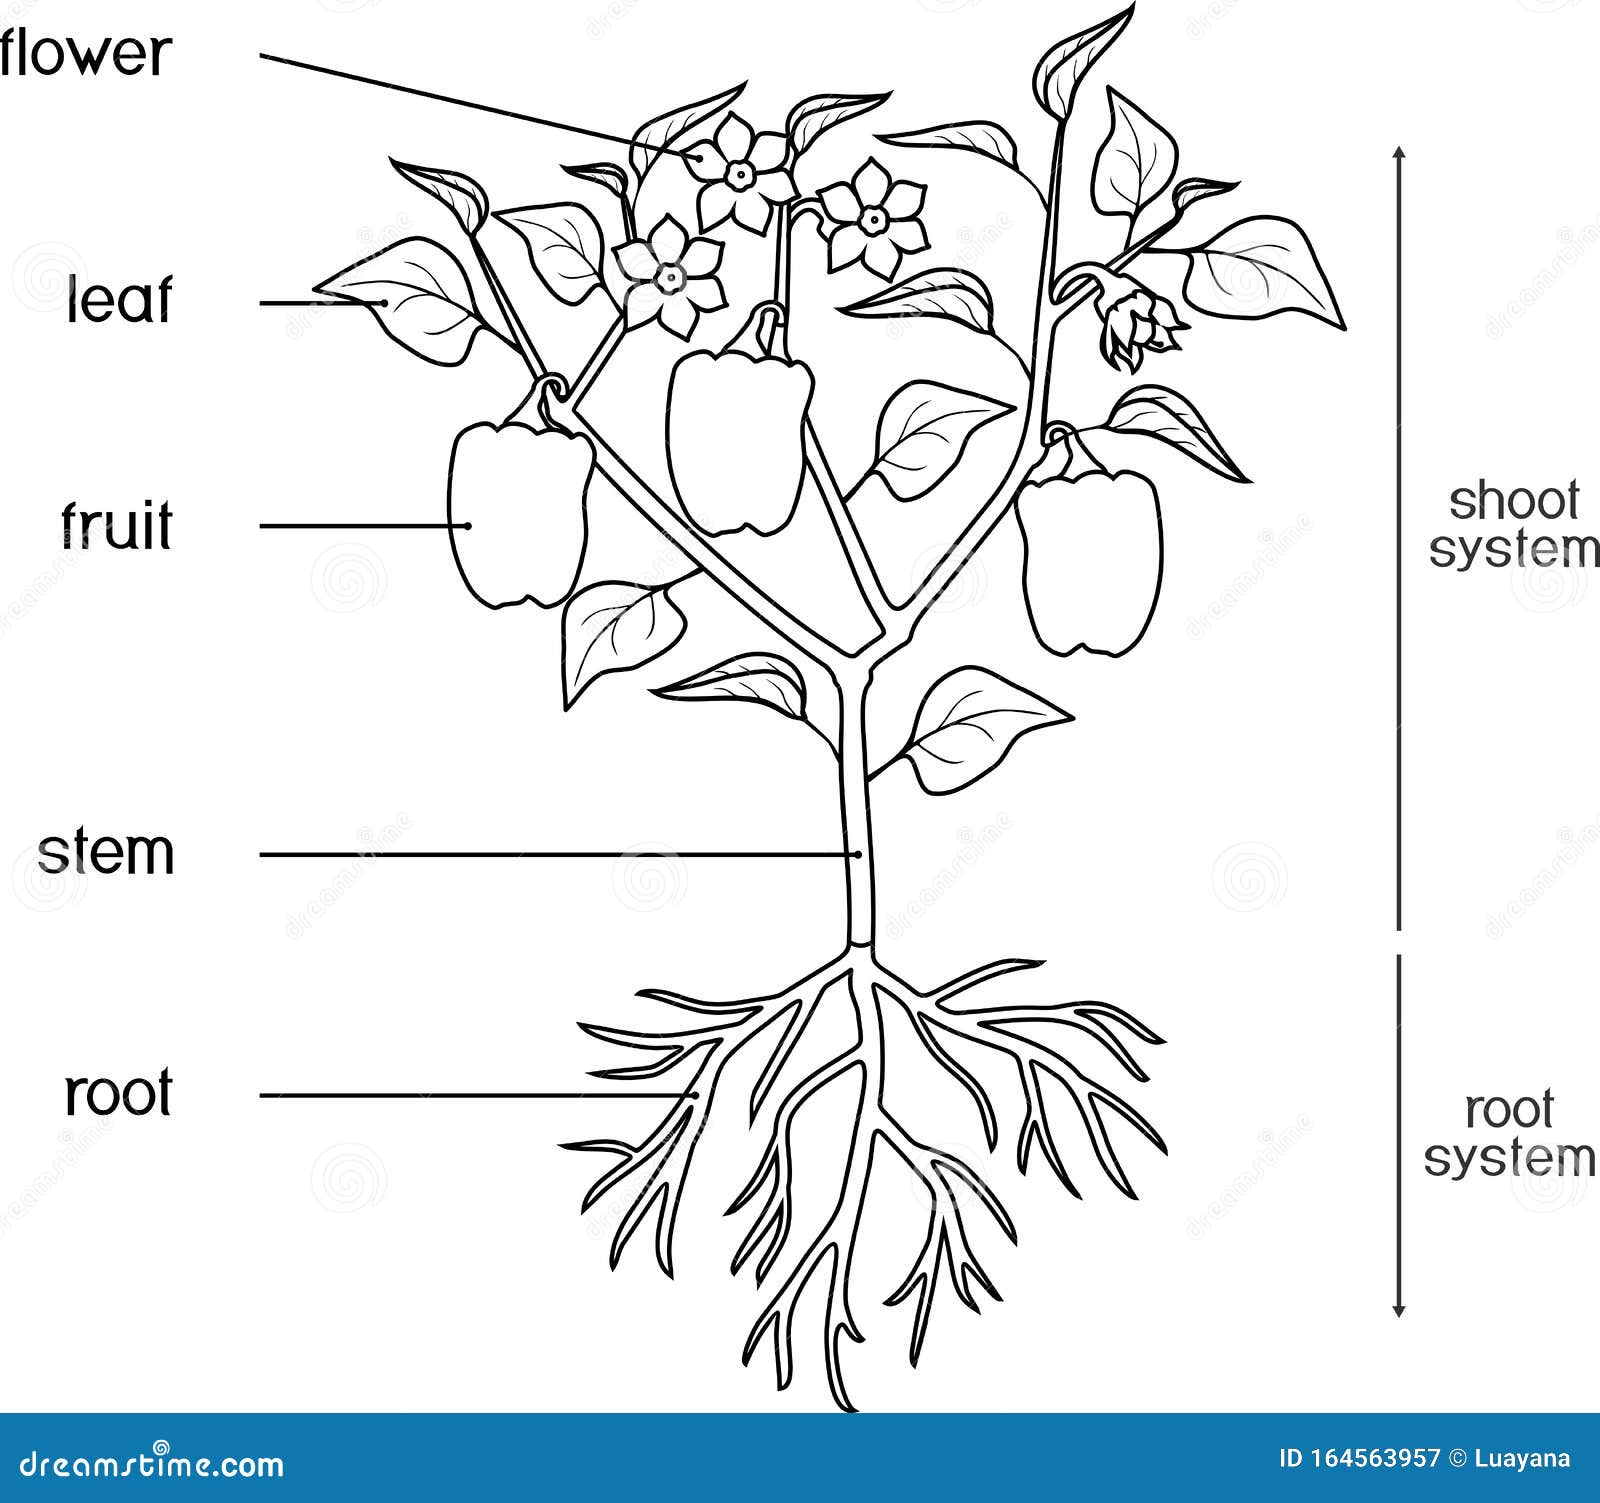 Coloring Page Parts Of Plant Morphology Of Pepper Plant With Leaves Fruits Flowers And Root System Stock Vector Illustration Of Bell Colouring 164563957